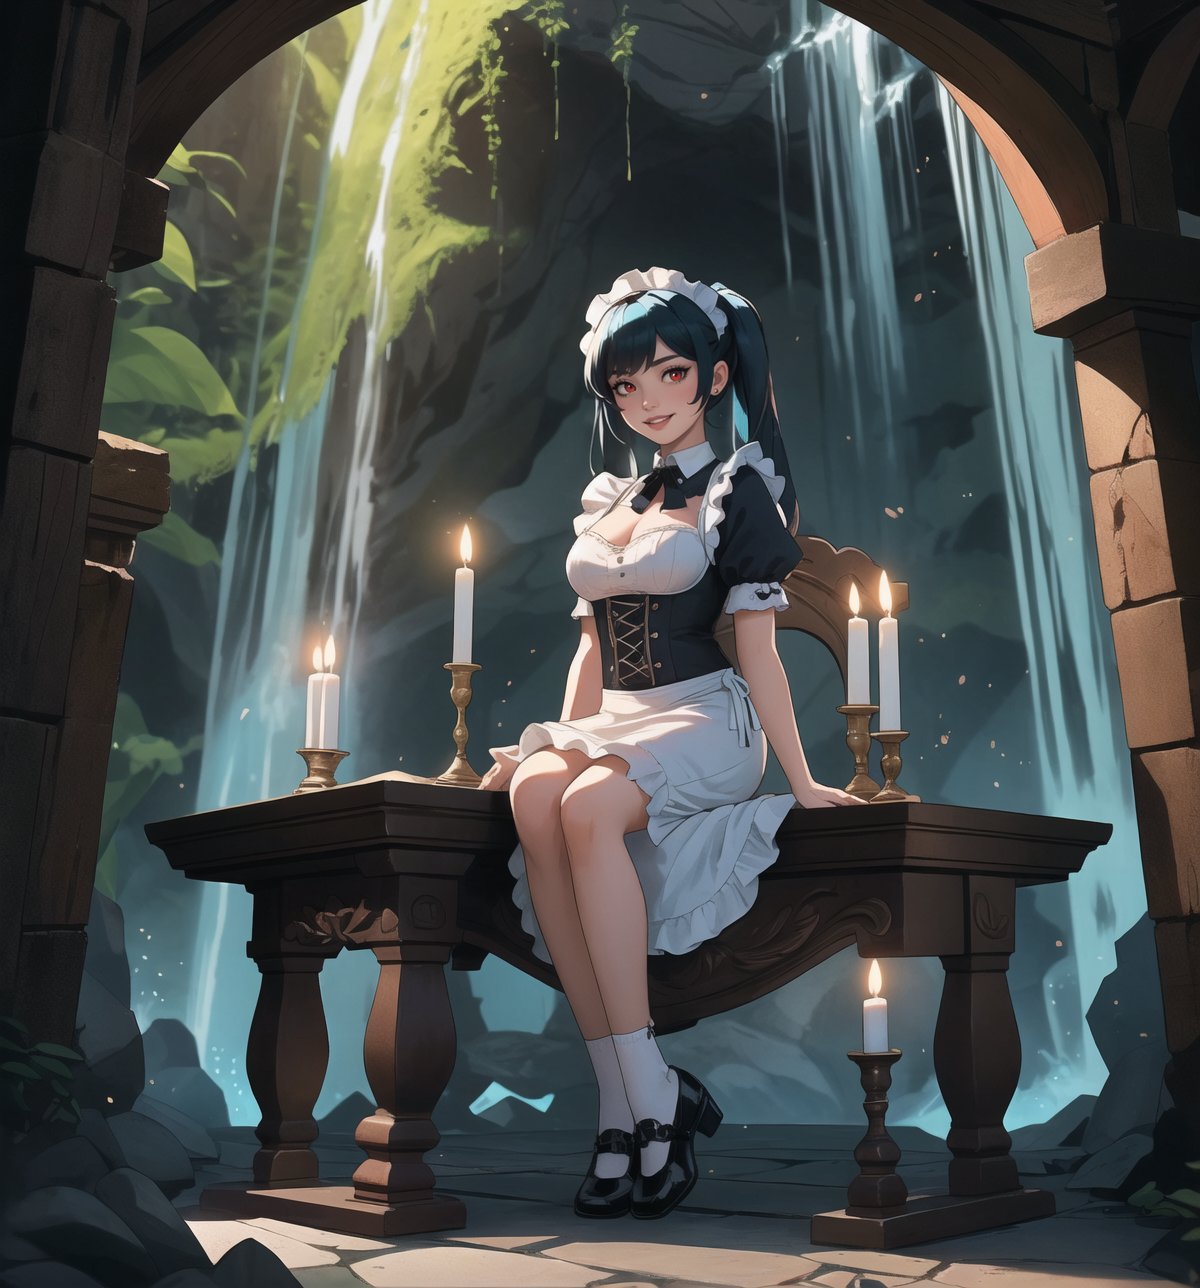 An ultra-detailed 16K masterpiece with macabre styles fused with fantastical elements, rendered in ultra-high resolution with realistic details. | A 33-year-old woman, dressed as a maid, wearing a simple blue uniform, white apron, black shoes and white socks. She has long blue hair, divided into two pigtails, and red eyes, looking at the viewer with a seductive and mysterious expression, smiling and showing her teeth. It is located in a macabre cave, with damp stone walls, stalactites and stalagmites, and a waterfall of dirty water falling to the floor. The cave has an altar made of wood and wooden architecture scattered throughout the environment. The dim light of a few candles illuminates the gloomy environment, creating dramatic shadows and highlighting the details of the scene. | The image highlights the woman's sensual figure and the cave's architectural elements. The rock and wooden structures, along with the woman, the altar, the pillars and the macabre sculptures, create a frightening and seductive environment. Thunder in the night sky illuminates the scene, creating dramatic shadows and highlighting the details of the scene. | Soft, shadowy lighting effects create a tense, desire-filled atmosphere, while rough, detailed textures on structures and costumes add realism to the image. | A sensual and terrifying scene of a woman dressed as a maid in a macabre cave, fusing elements of macabre art and fantasy. | ((((The image reveals a full-body image of the character as she assumes a sensual pose. She enticingly leans, throws herself, and supports herself against a structure within the scene in an exciting manner. While leaning back, she takes on a sensual pose, boldly throwing herself onto the structure and reclining back in an exhilarating way.)))). | ((((full-body image)))), ((perfect pose)), ((perfect fingers, better hands, perfect hands)), ((perfect legs, perfect feet)), ((huge breasts)), ((perfect design)), ((perfect composition)), ((very detailed scene, very detailed background, perfect layout, correct imperfections)), More Detail, Enhance